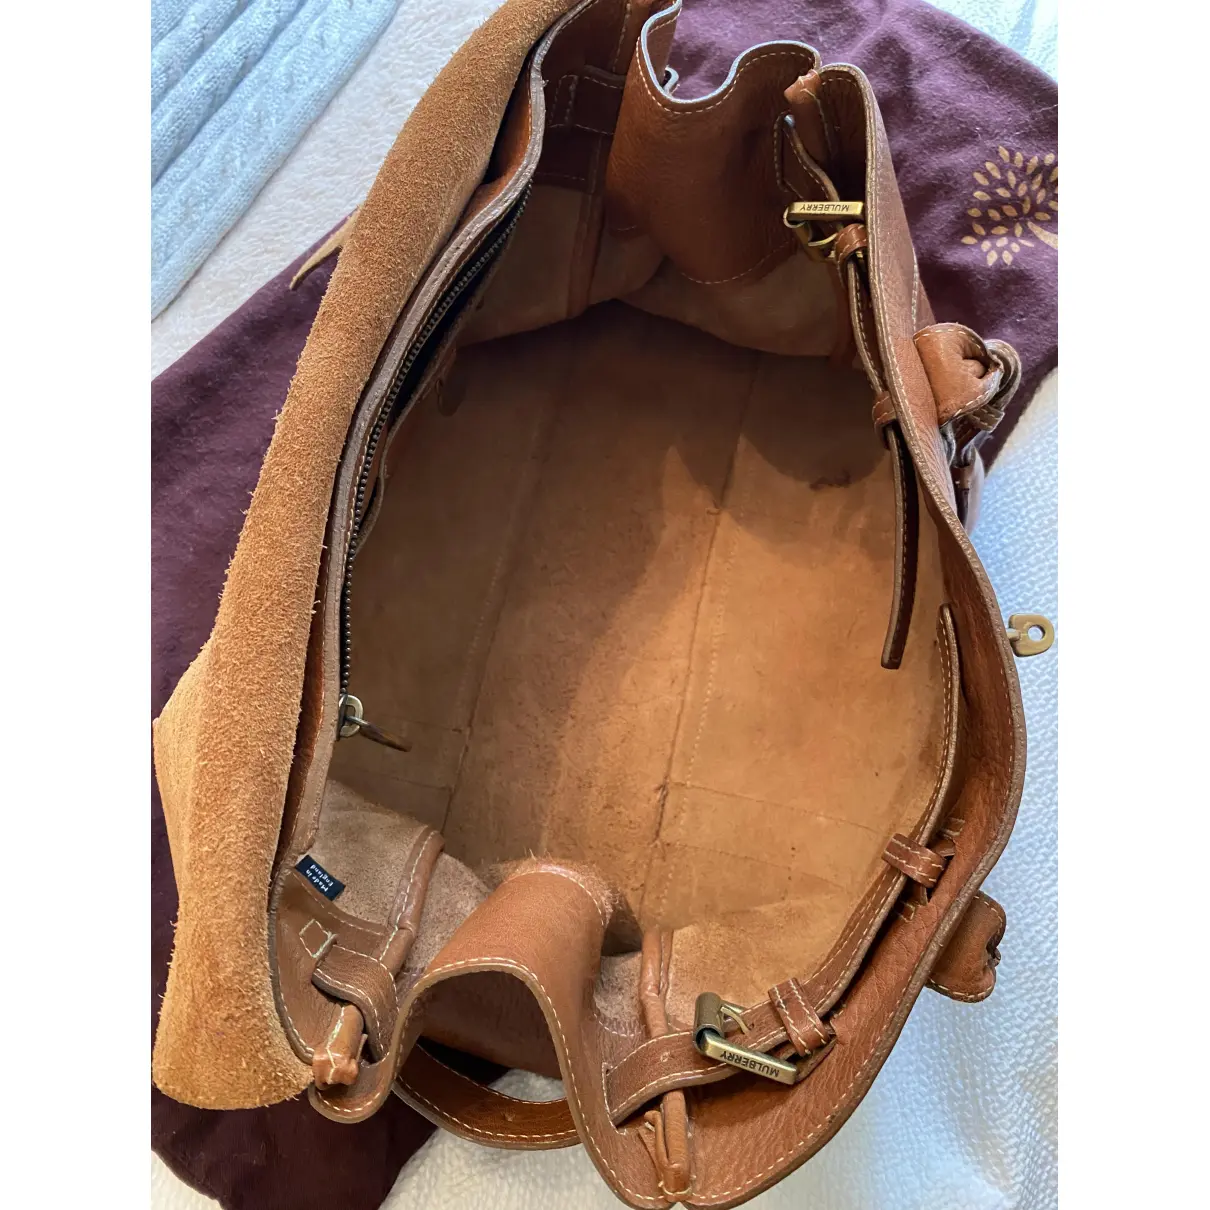 Bayswater leather bag Mulberry